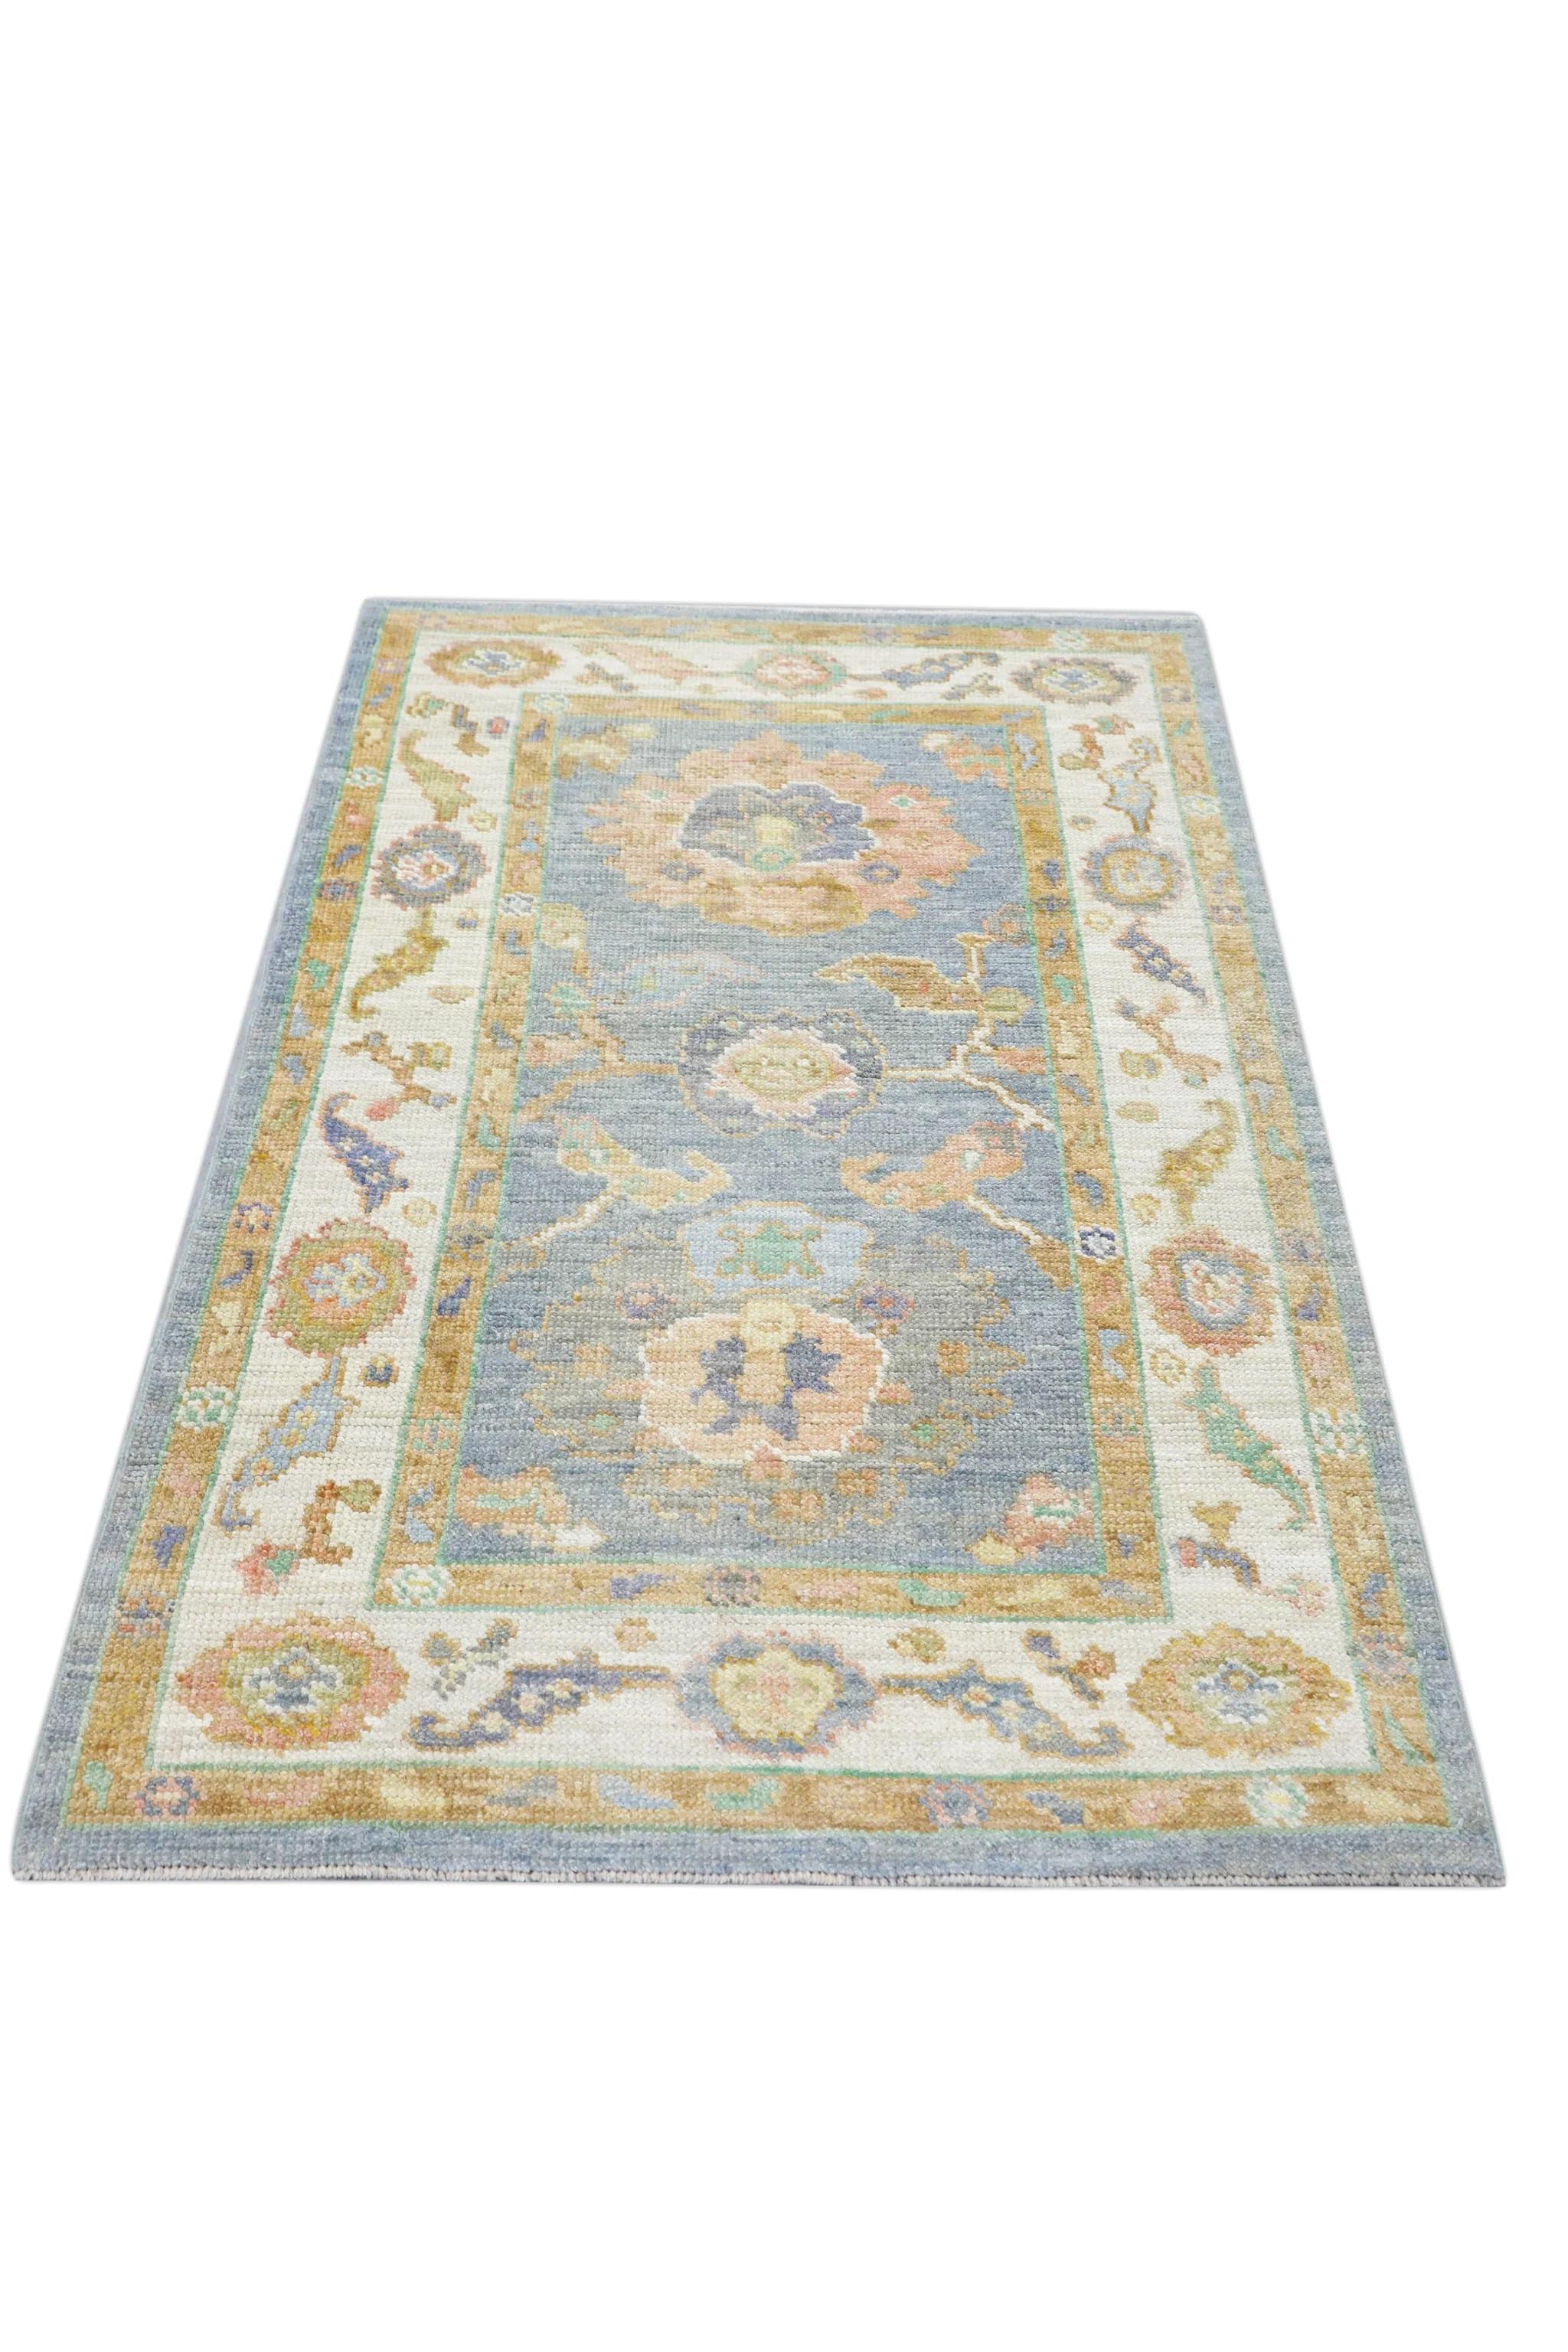 Floral Handwoven Wool Turkish Oushak Rug with Blue Field Yellow Border 2'11 X 5' For Sale 4